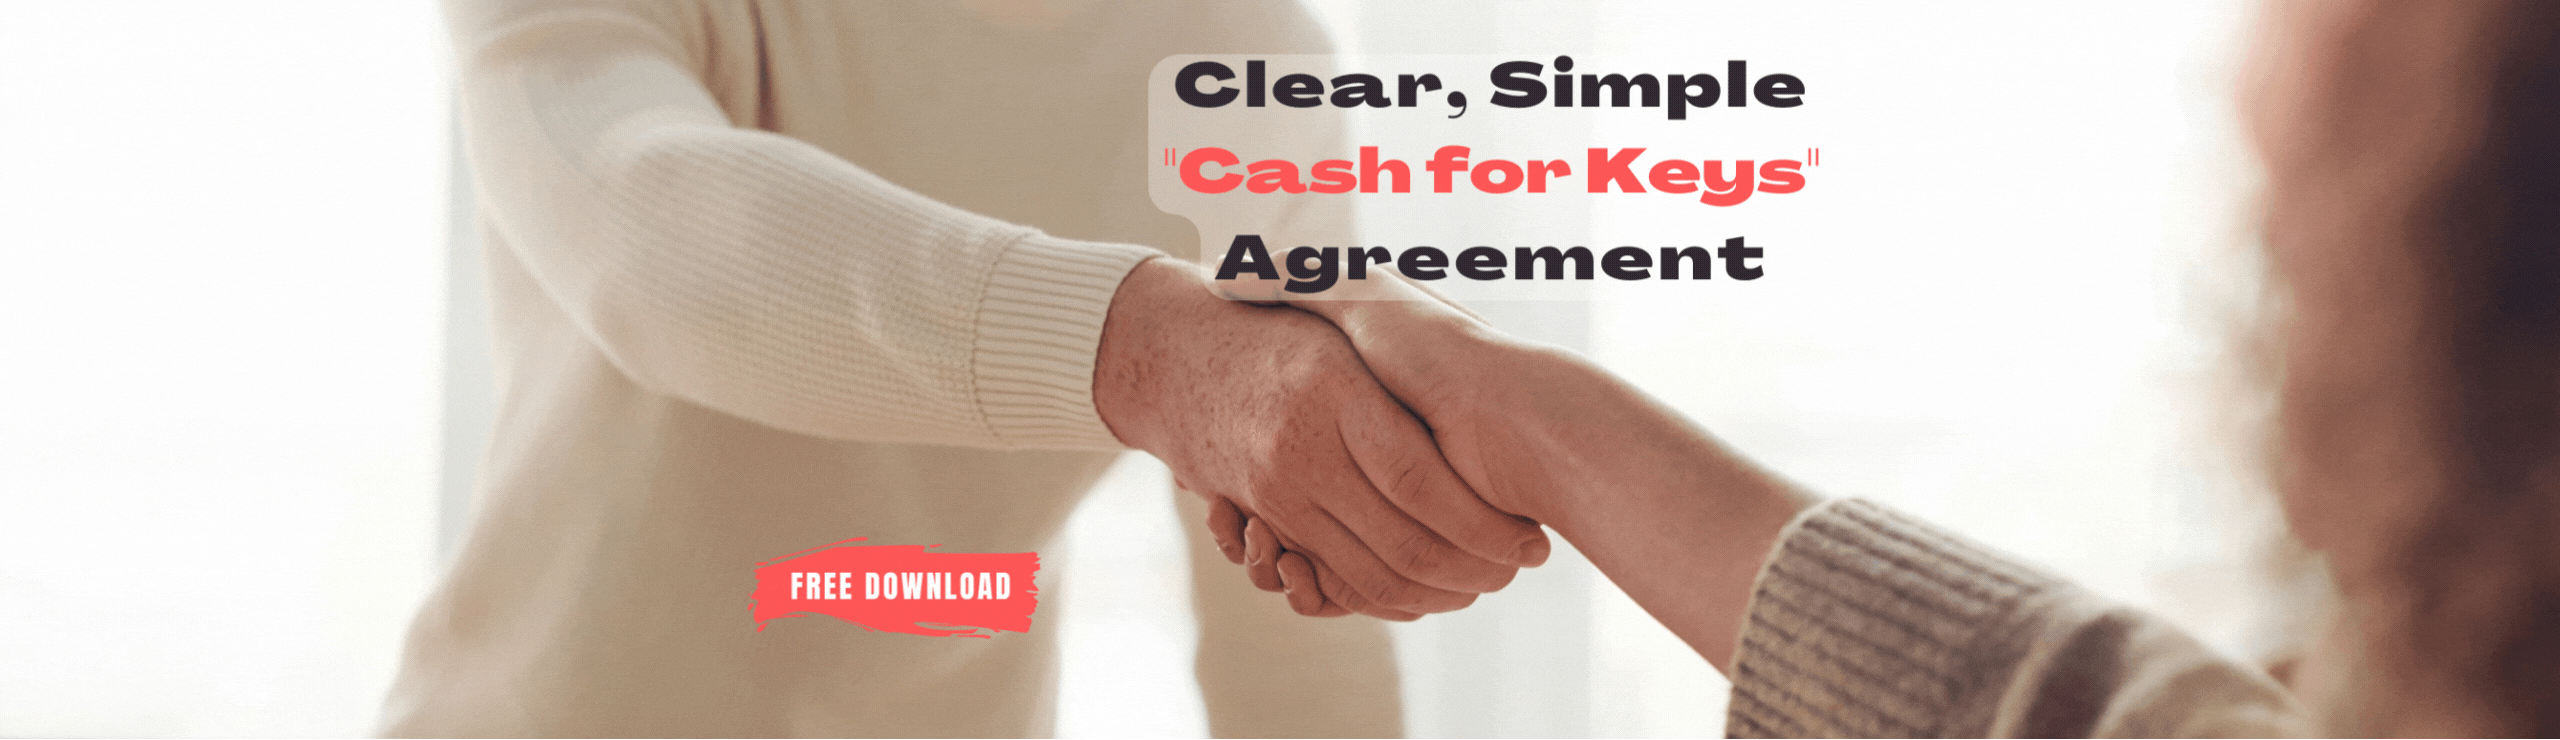 My Clear, Simple “Cash for Keys” Agreement